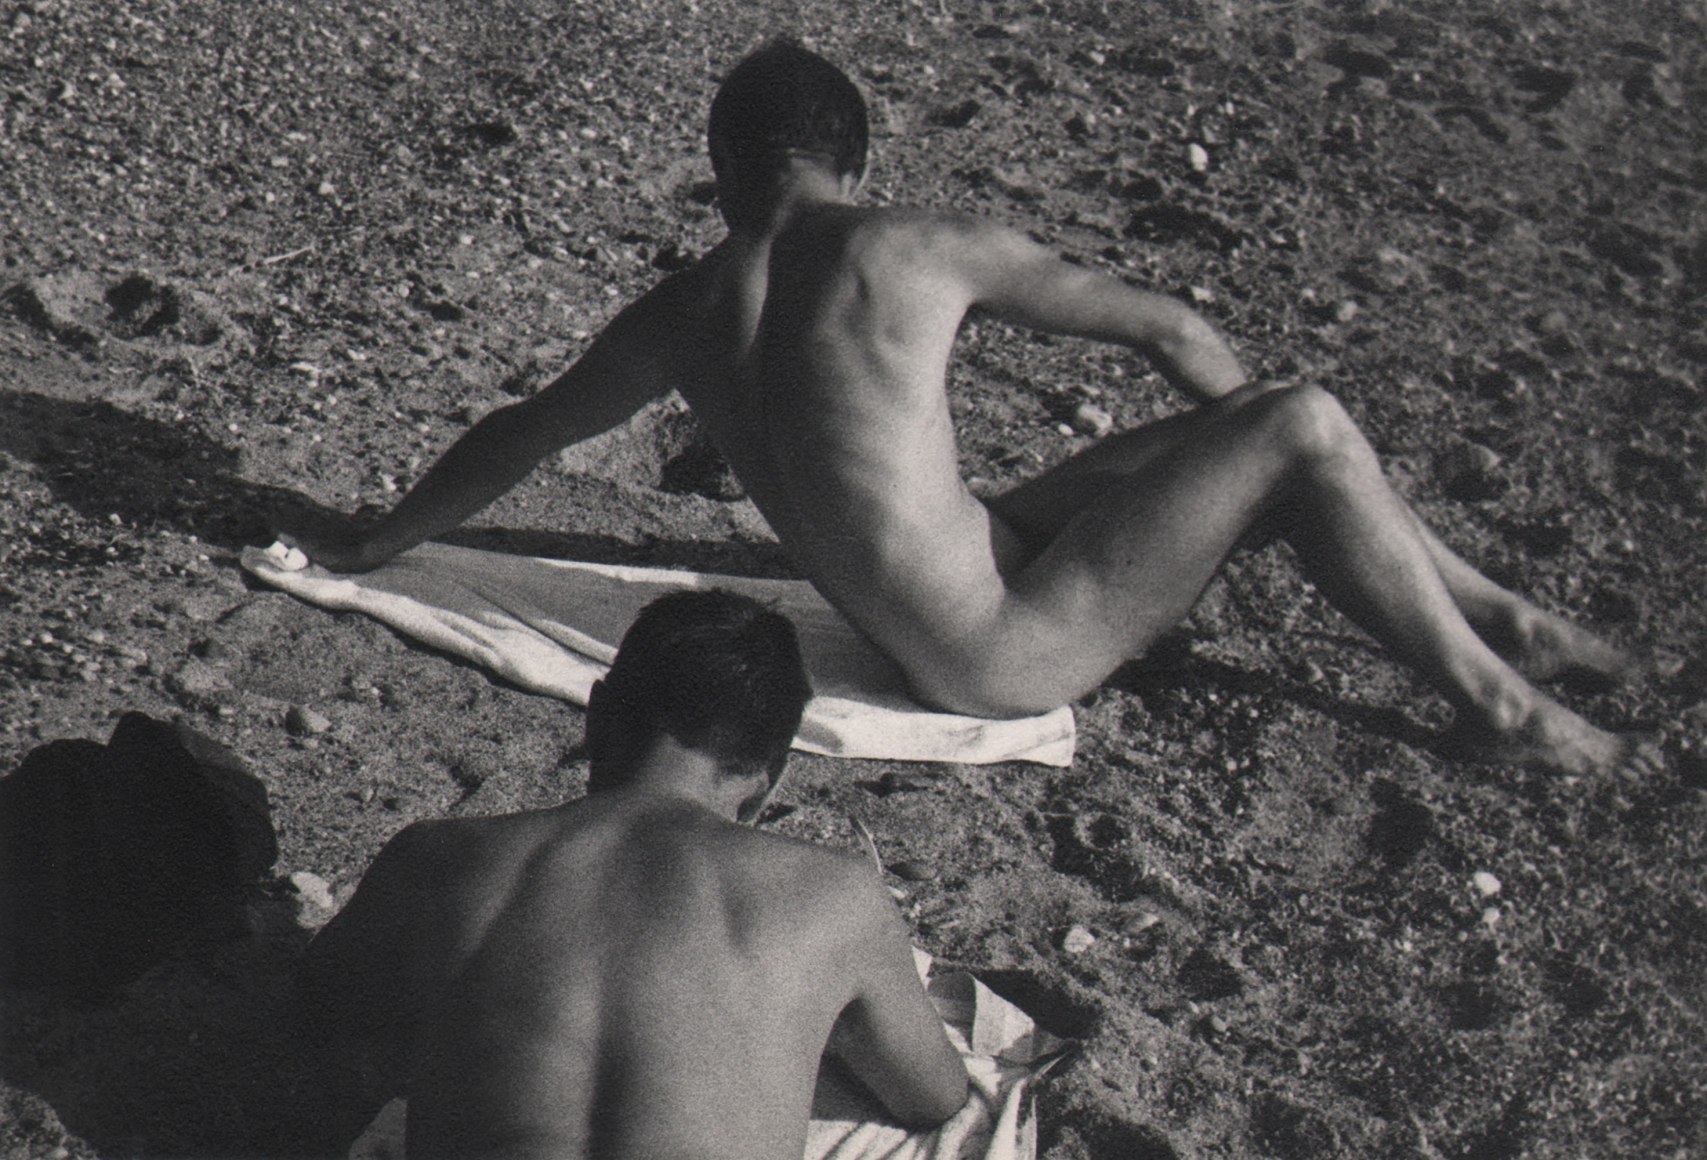 PaJaMa, George Tooker &amp; Paul Cadmus, Provincetown, ​c. 1945. Two male nude figures on towels on the beach, backs to the camera. One lays on his stomach, the other sits, leaning back on one hand.